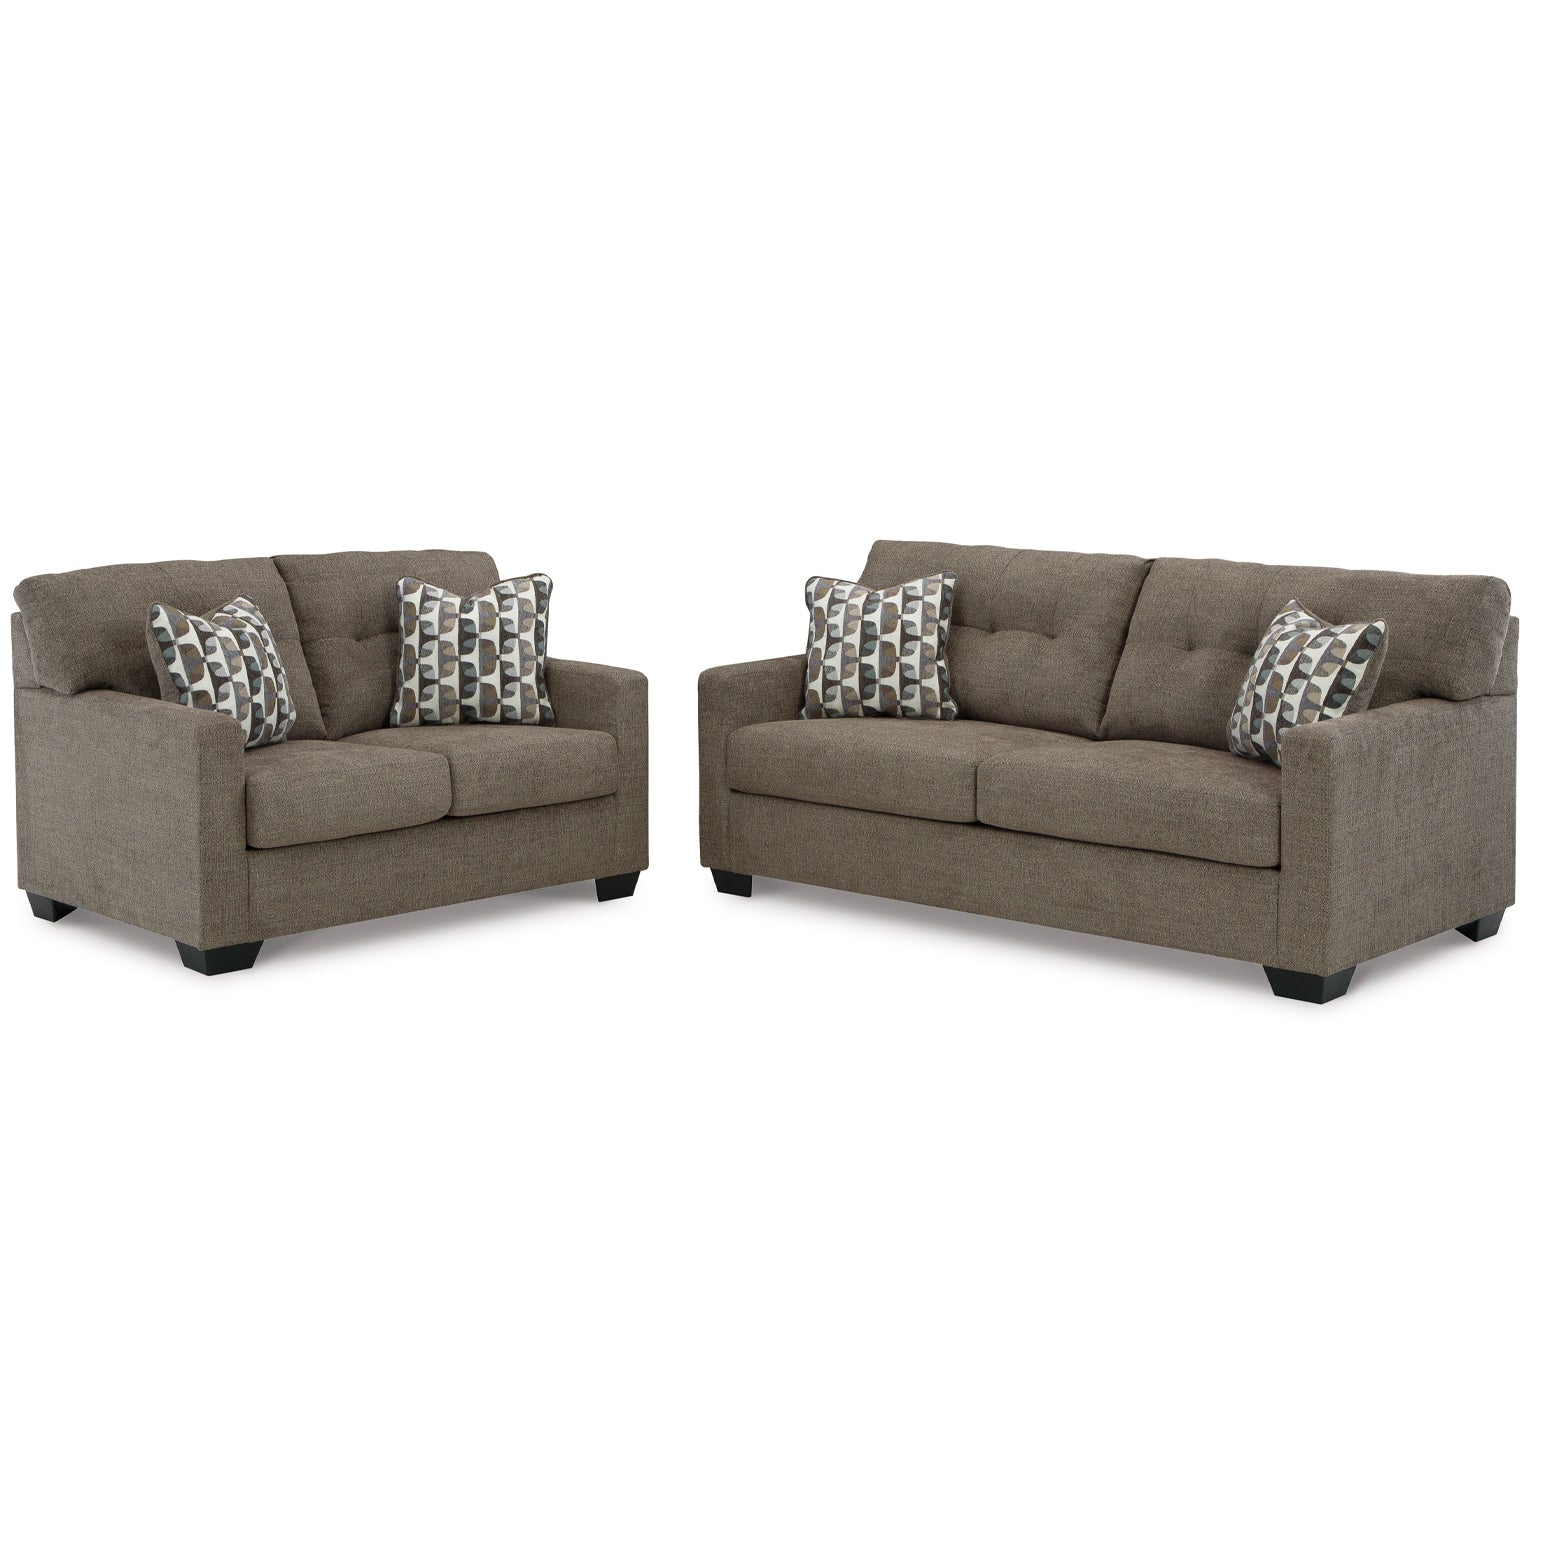 Elegant Mahoney Sofa and Loveseat set in rich chocolate color, perfect for a refined living room setup